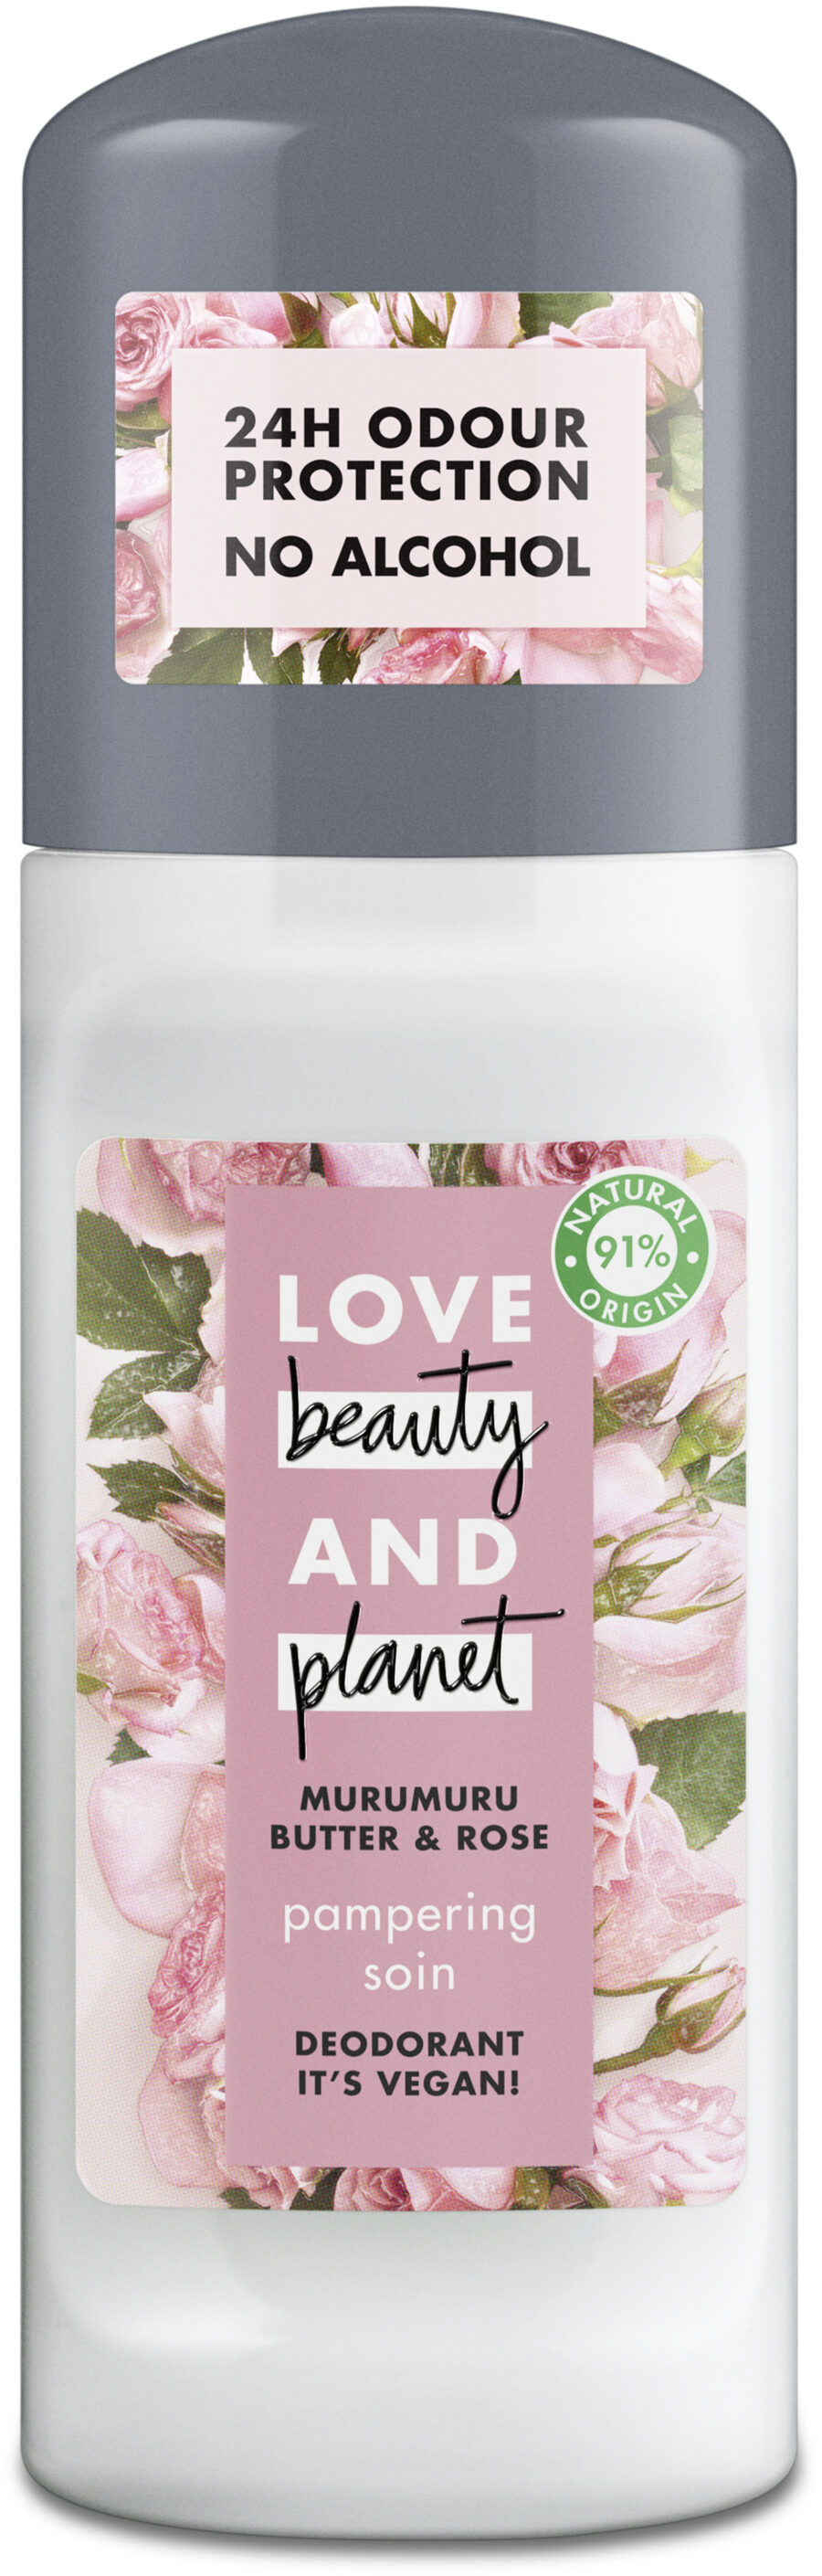 Love Beauty And Planet Déodorant Bille Soin 50ml - Tuote - fr